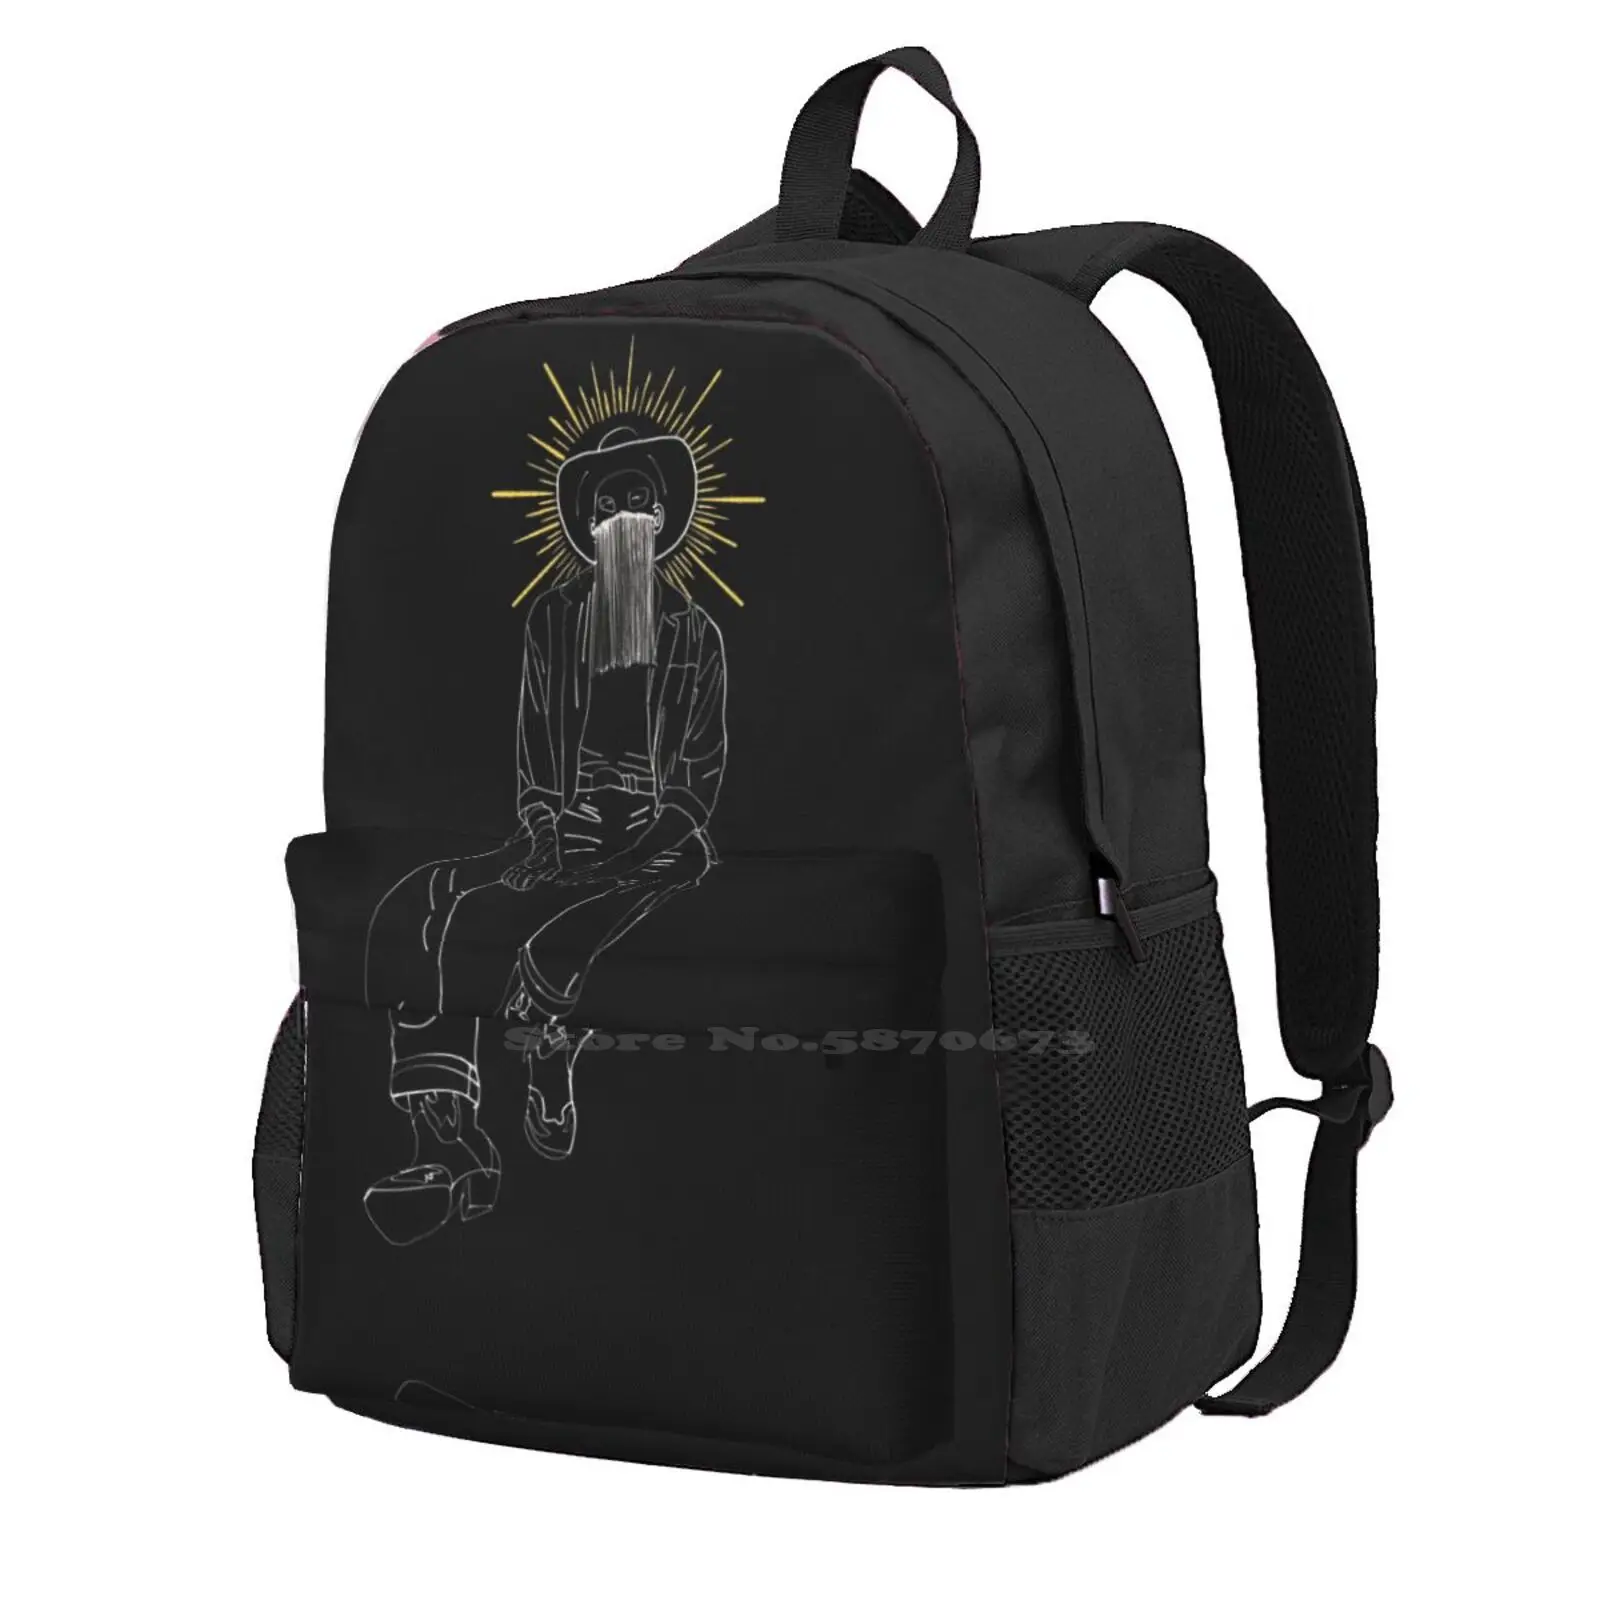 

St. Yee Haw Hot Sale Backpack Fashion Bags Orville Peck Lines Transparent